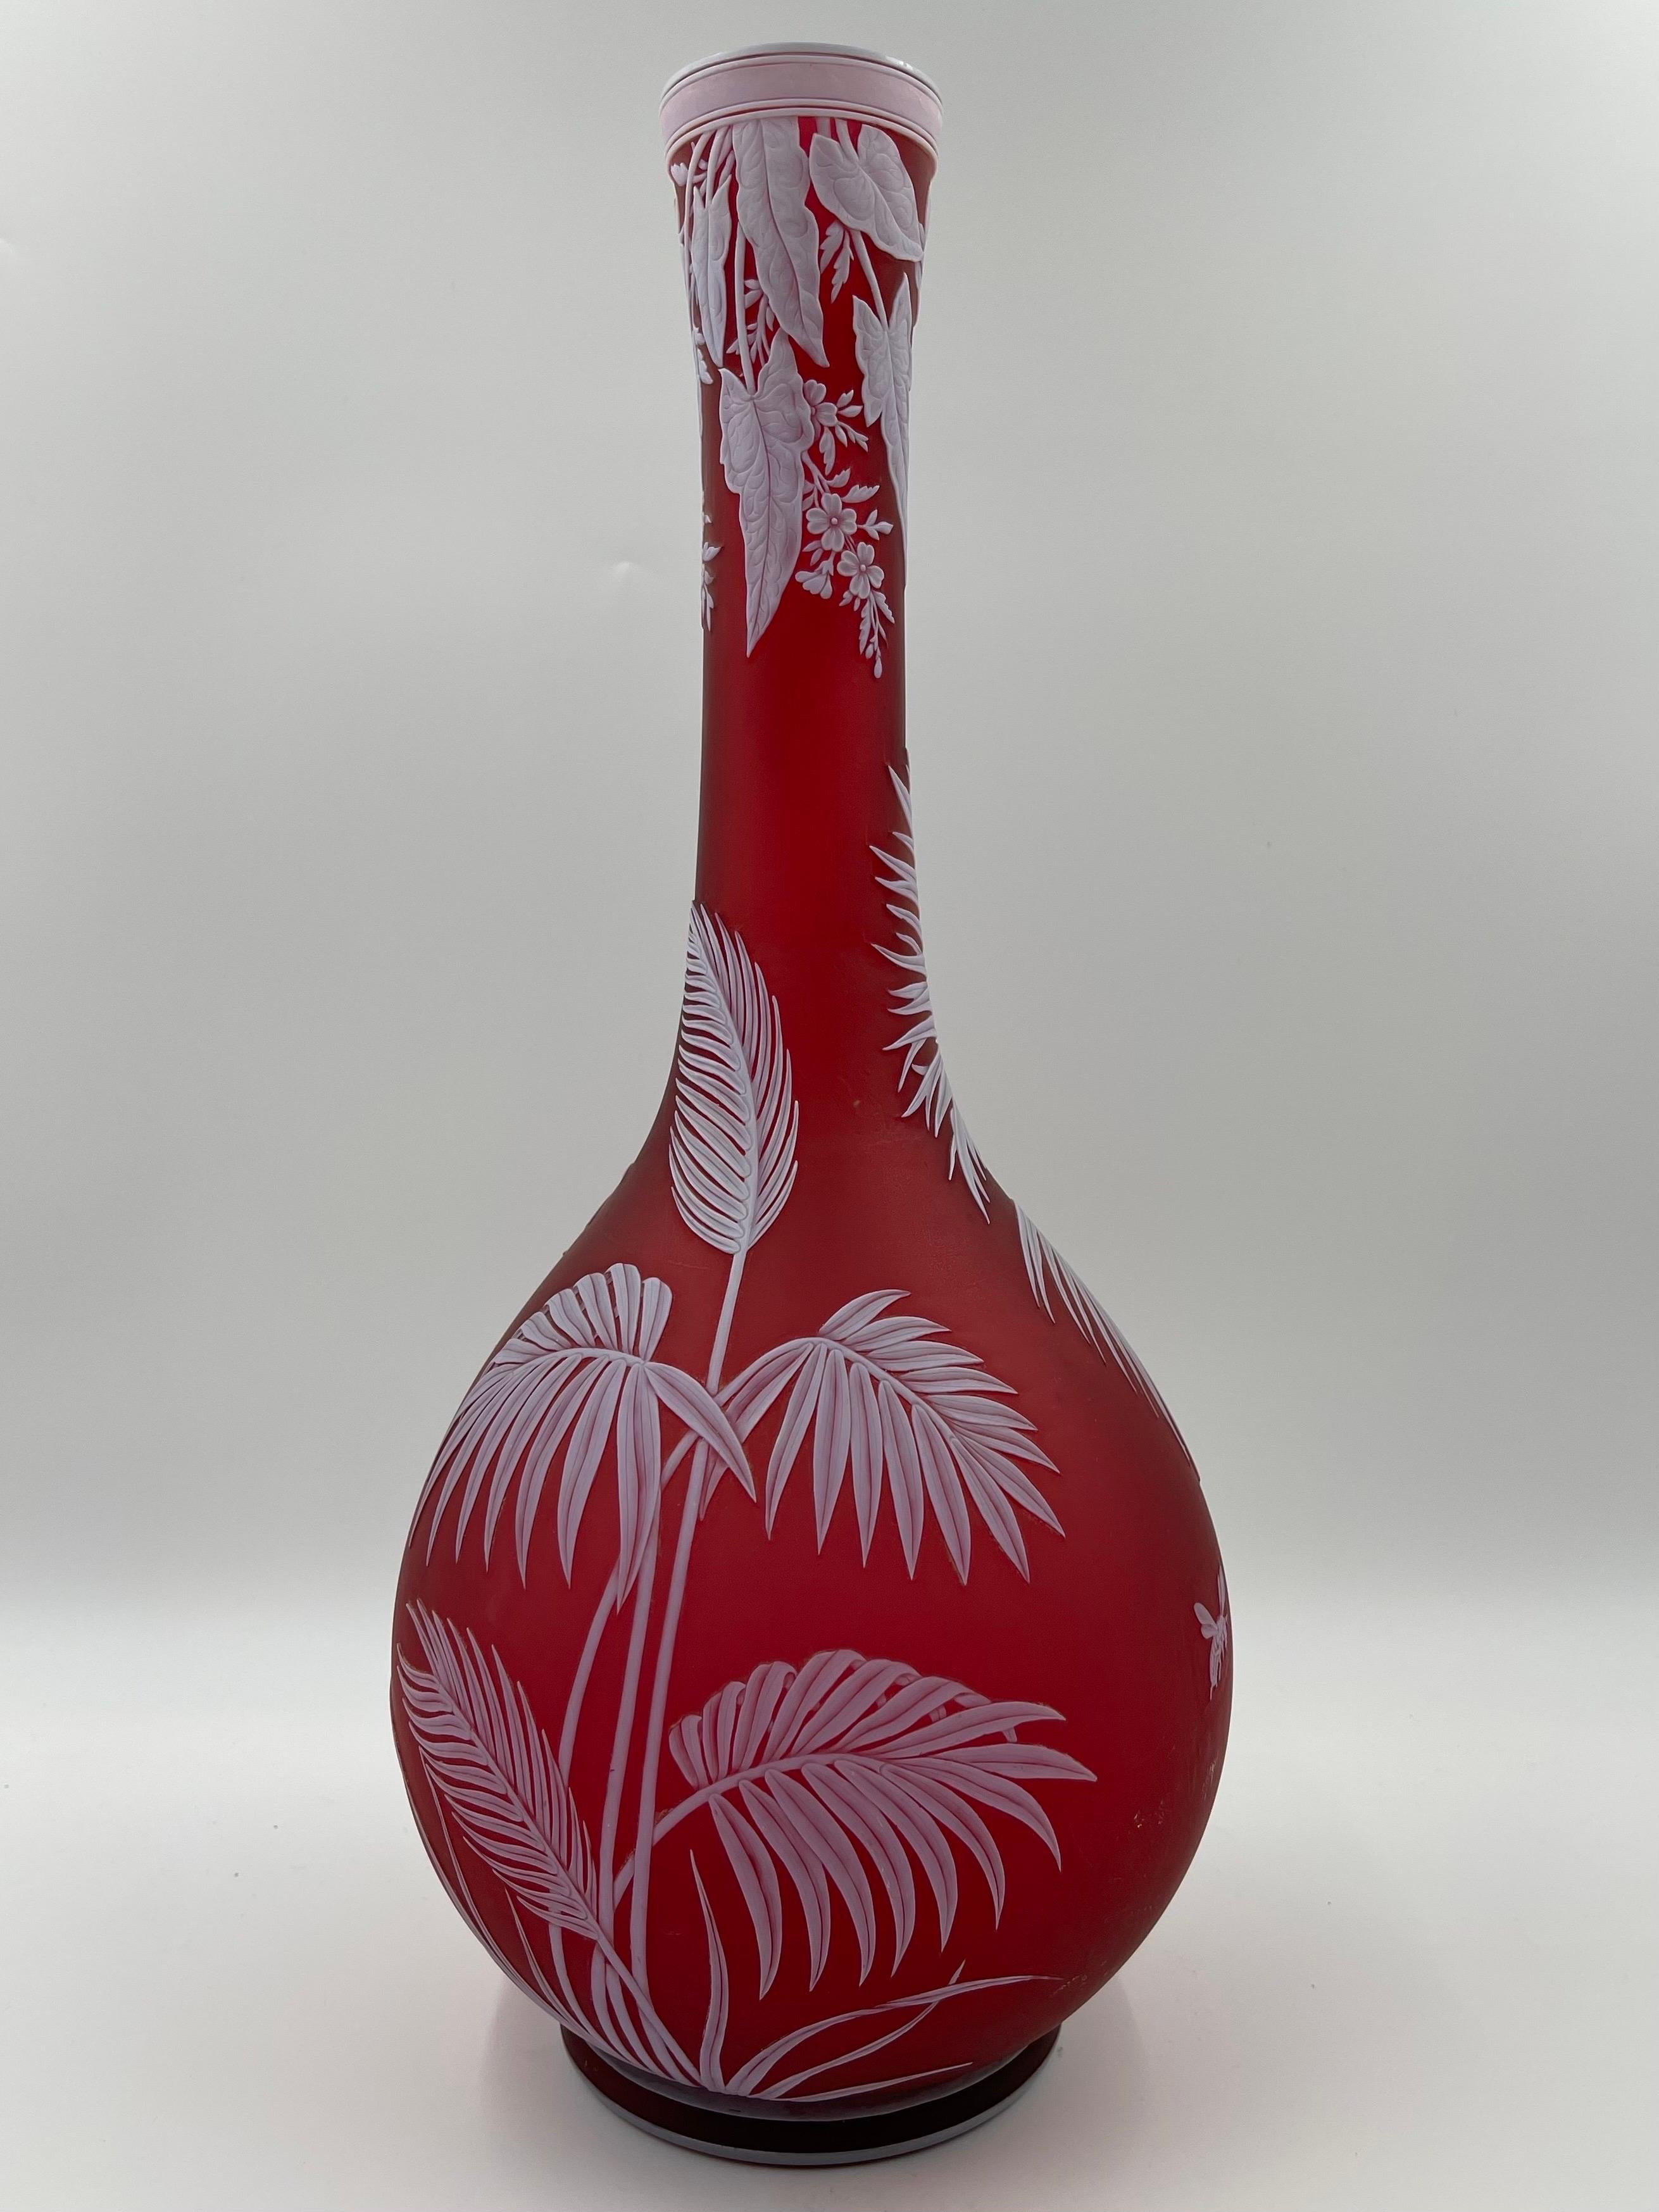 Monumental red carved Webb Cameo vase. Circa 1900
Decorated with ferns and bees 
A very impressive piece of Art glass 